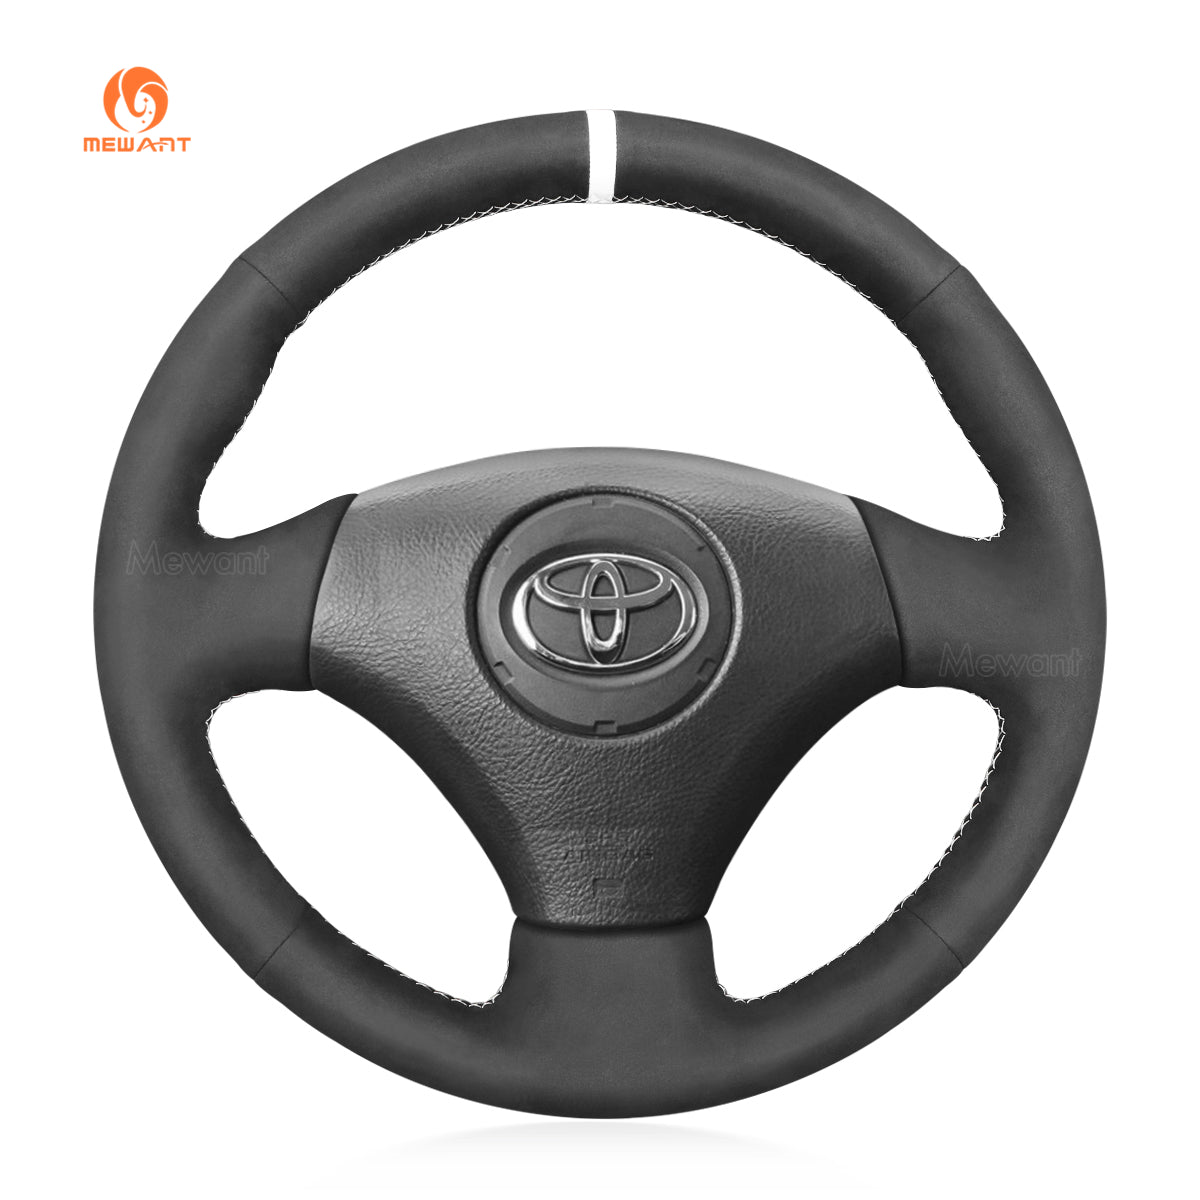 MEWANT Hand Stitch Car Steering Wheel Cover for Toyota Corolla (Verso) 2002-2004 / Yaris (Verso) 1999-2005